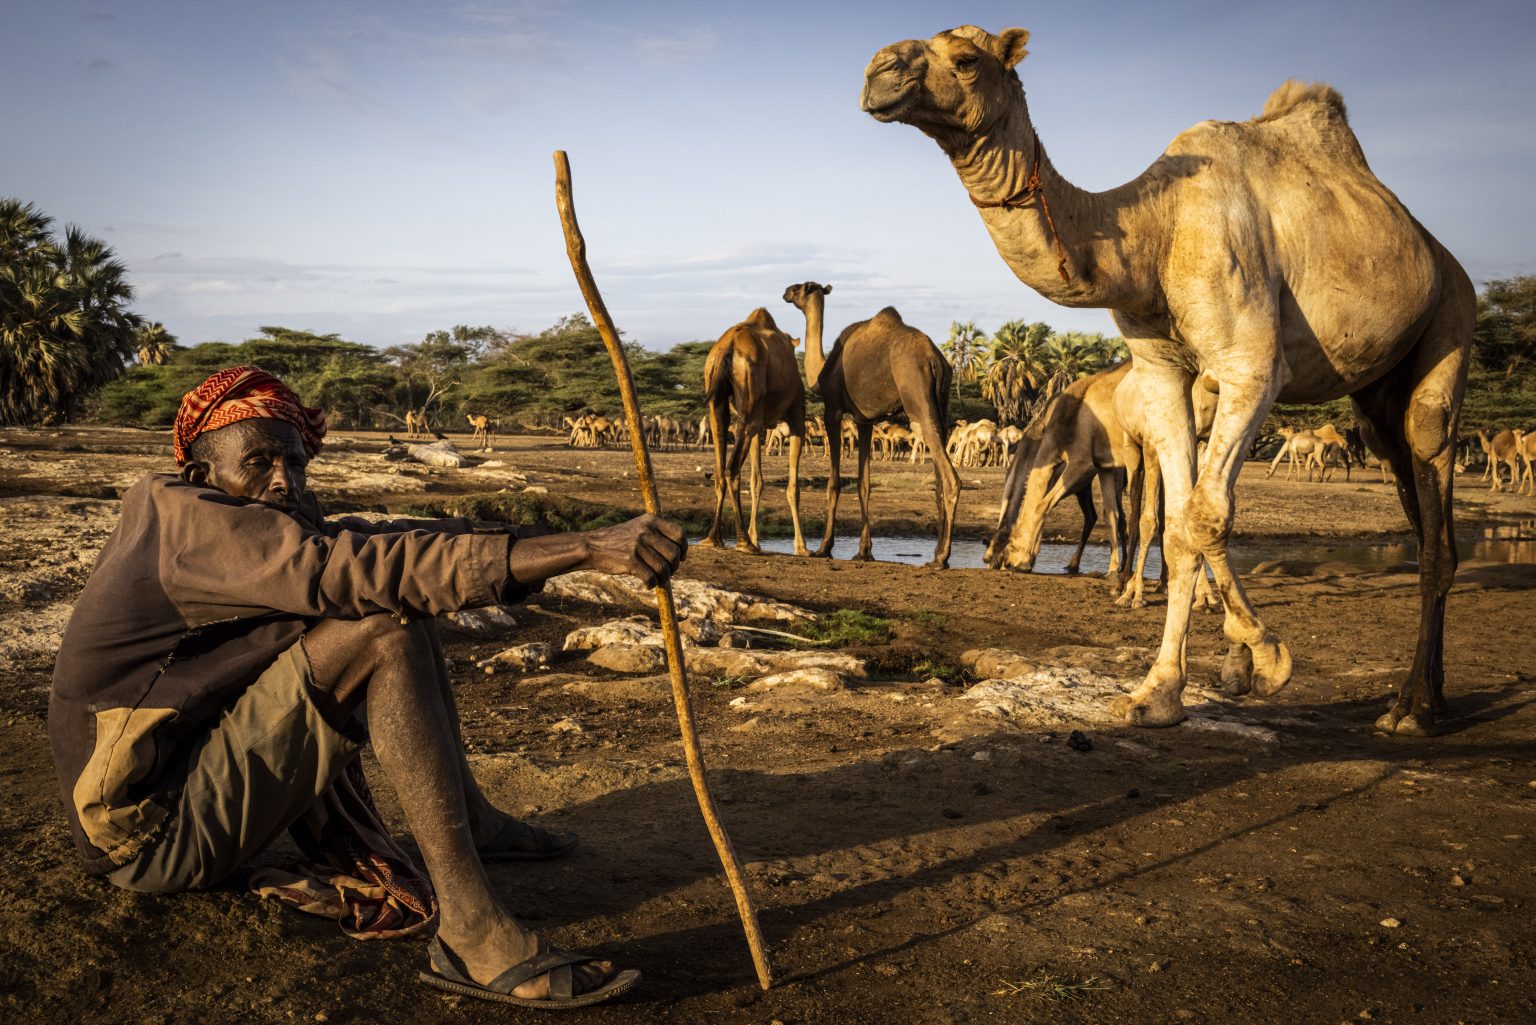 A man sitting next to camels